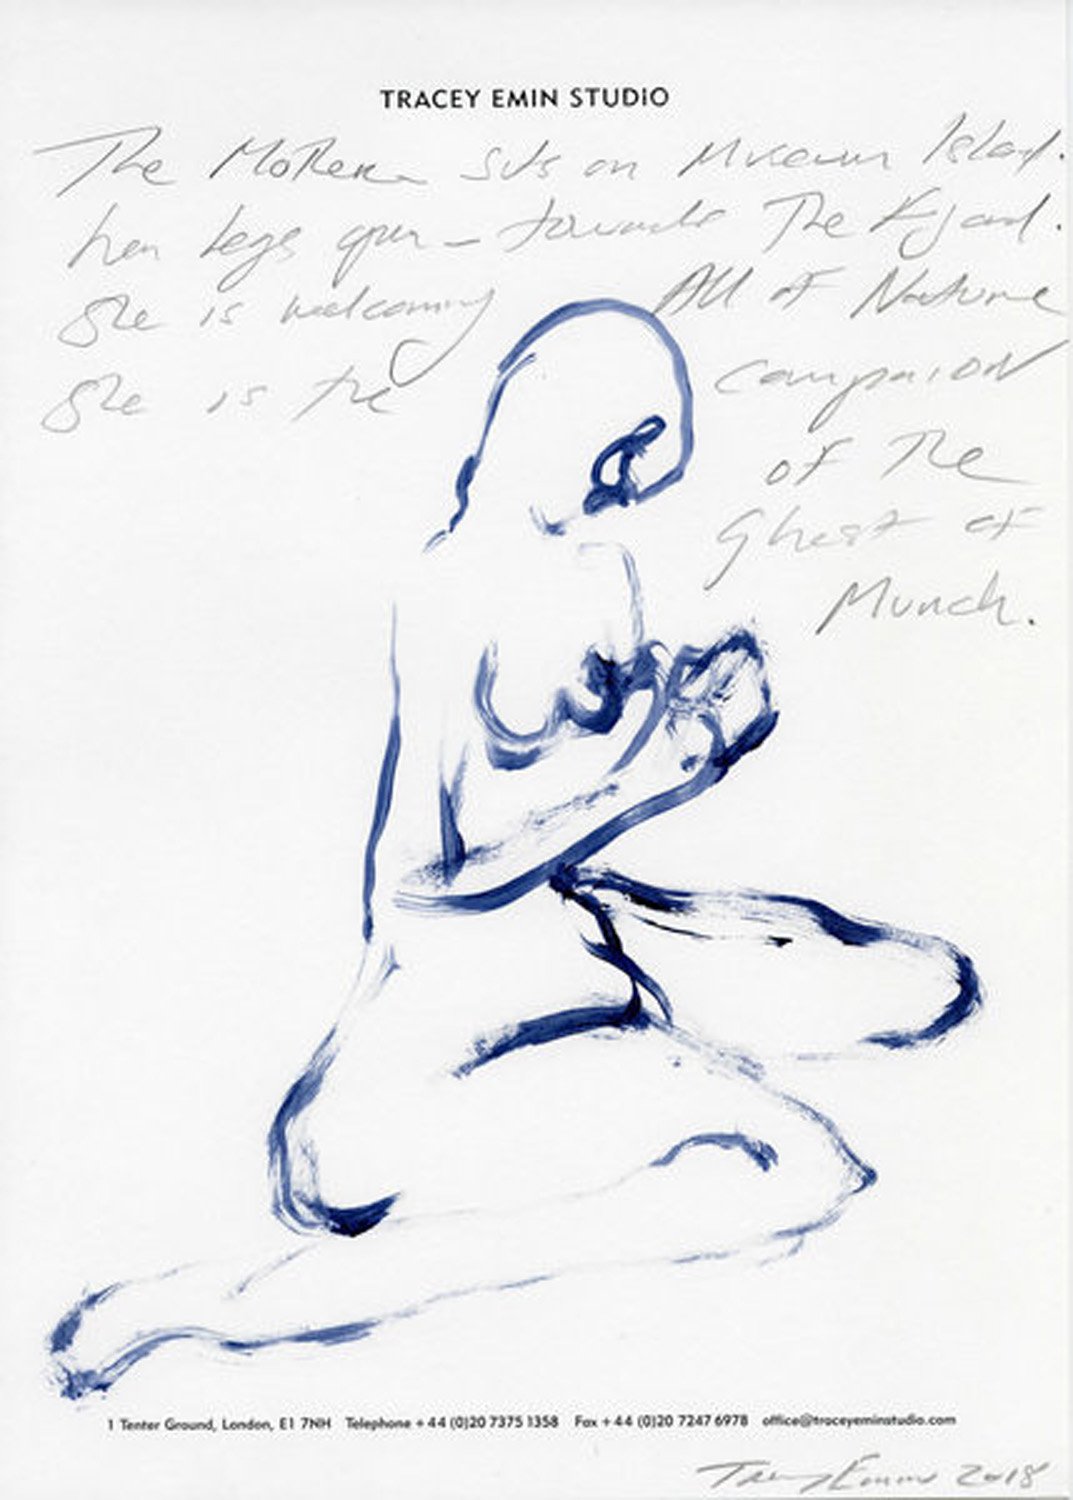 Tracey Emin, the Mother, drawing. Copyright Tracey Emin Studio